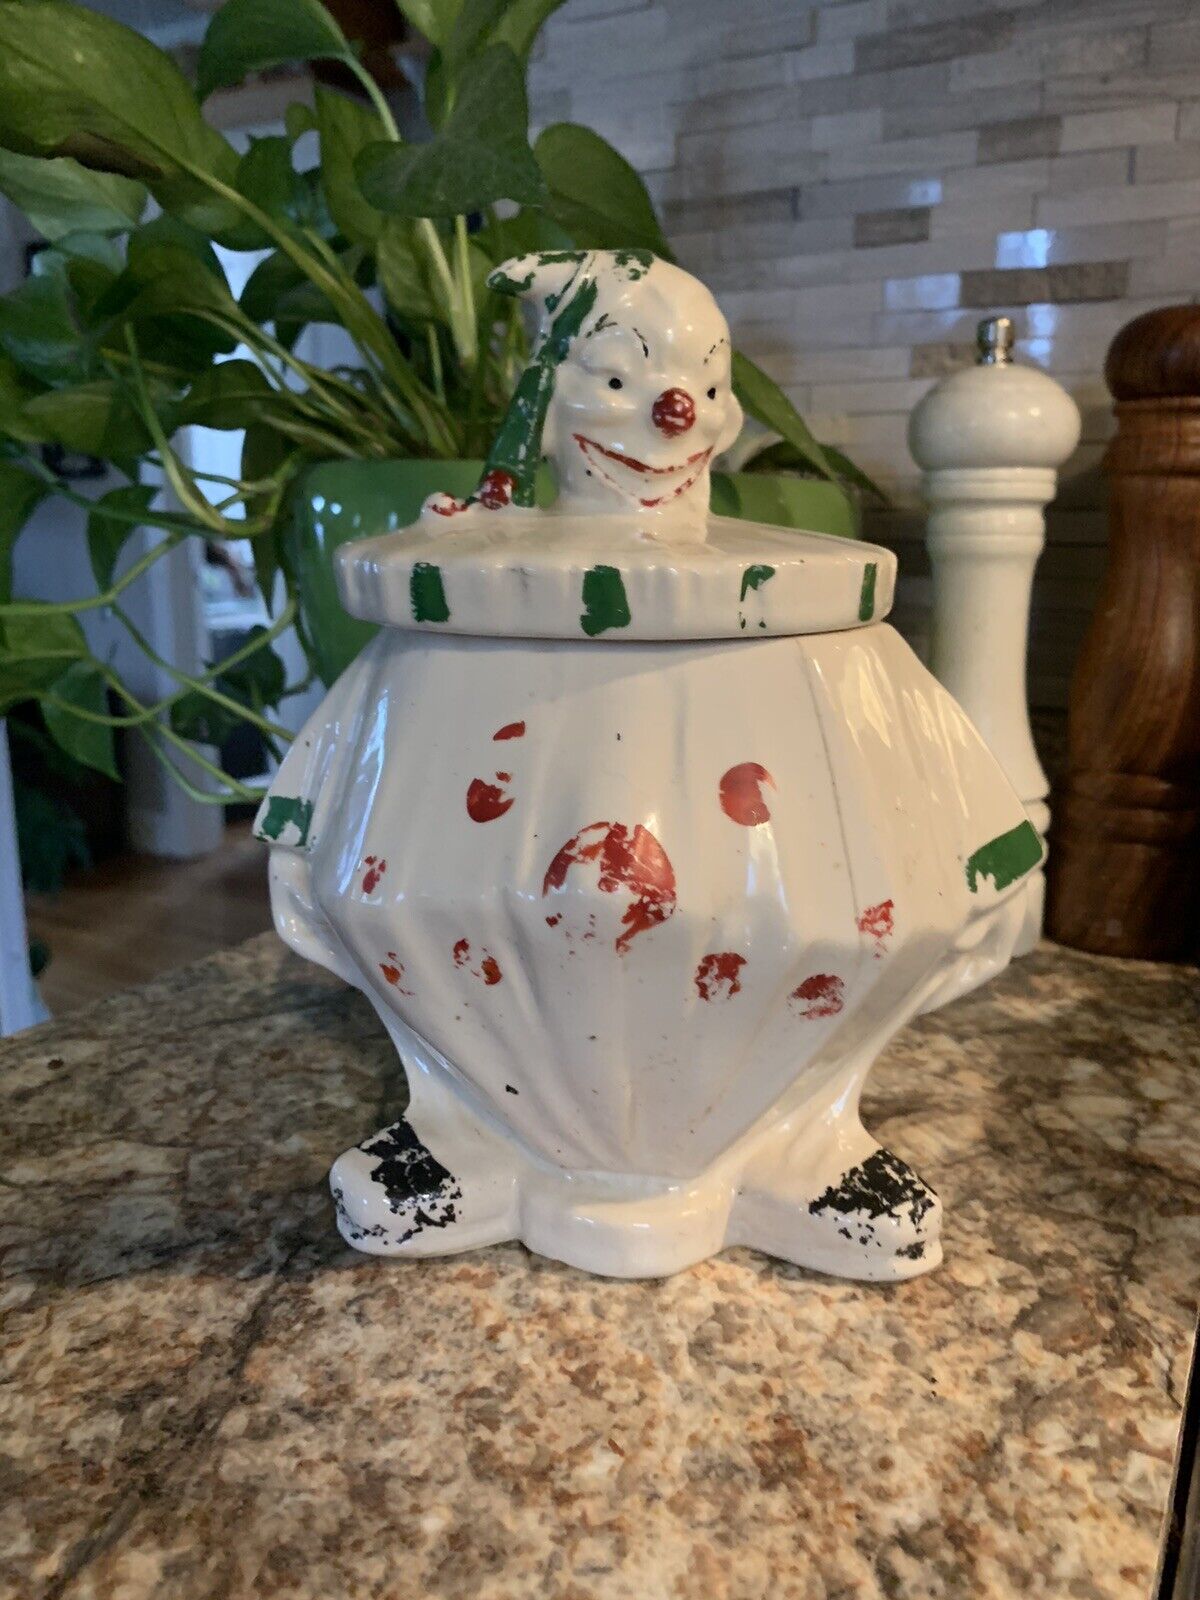 VINTAGE MCCOY POTTERY COOKIE JAR SCARY STANDING CLOWN 1940s MID CENTURY